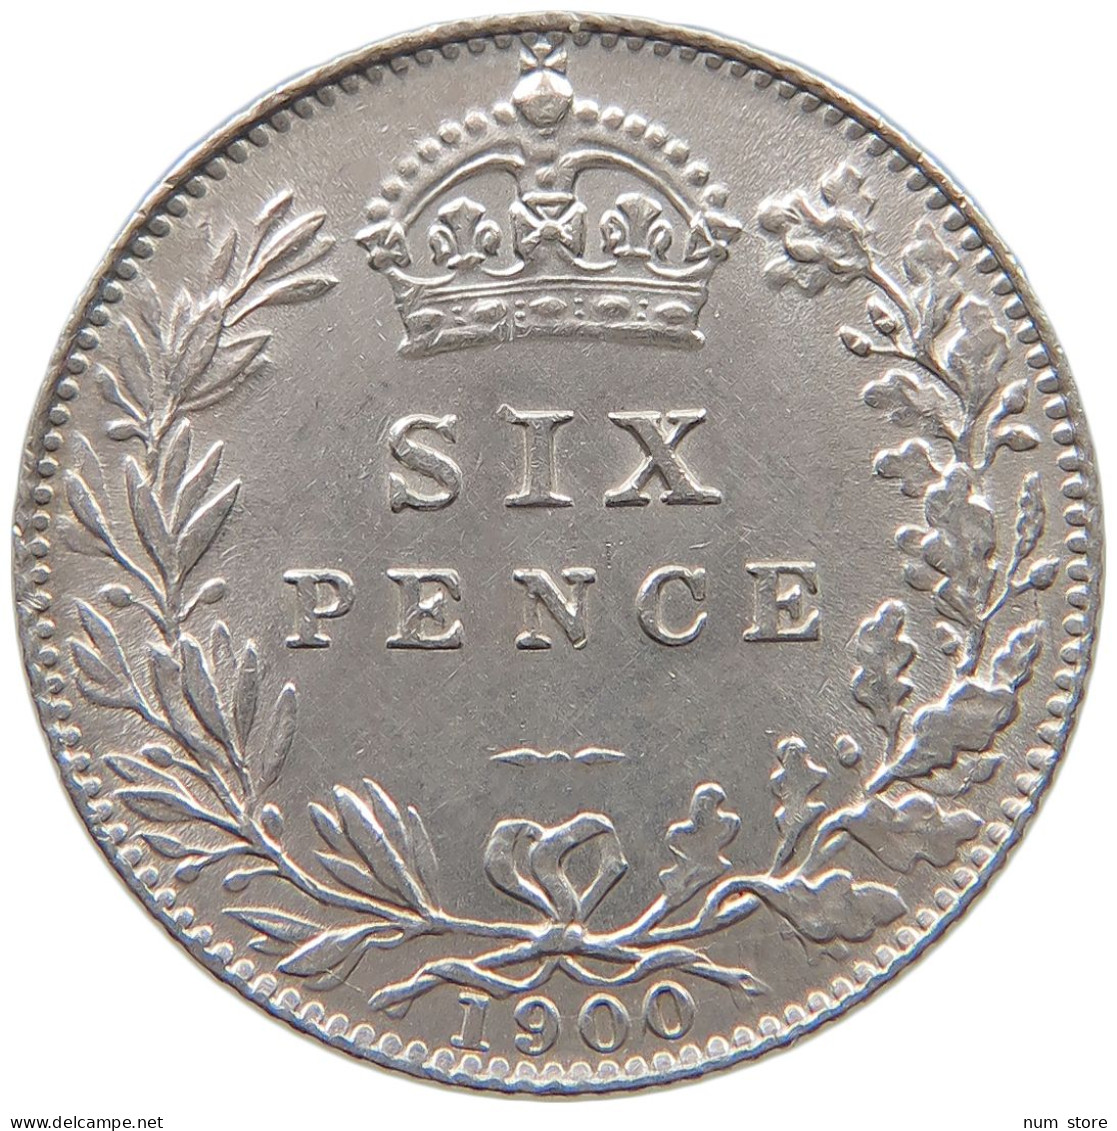 GREAT BRITAIN SIXPENCE 1900 Victoria 1837-1901 #t006 0013 - H. 6 Pence